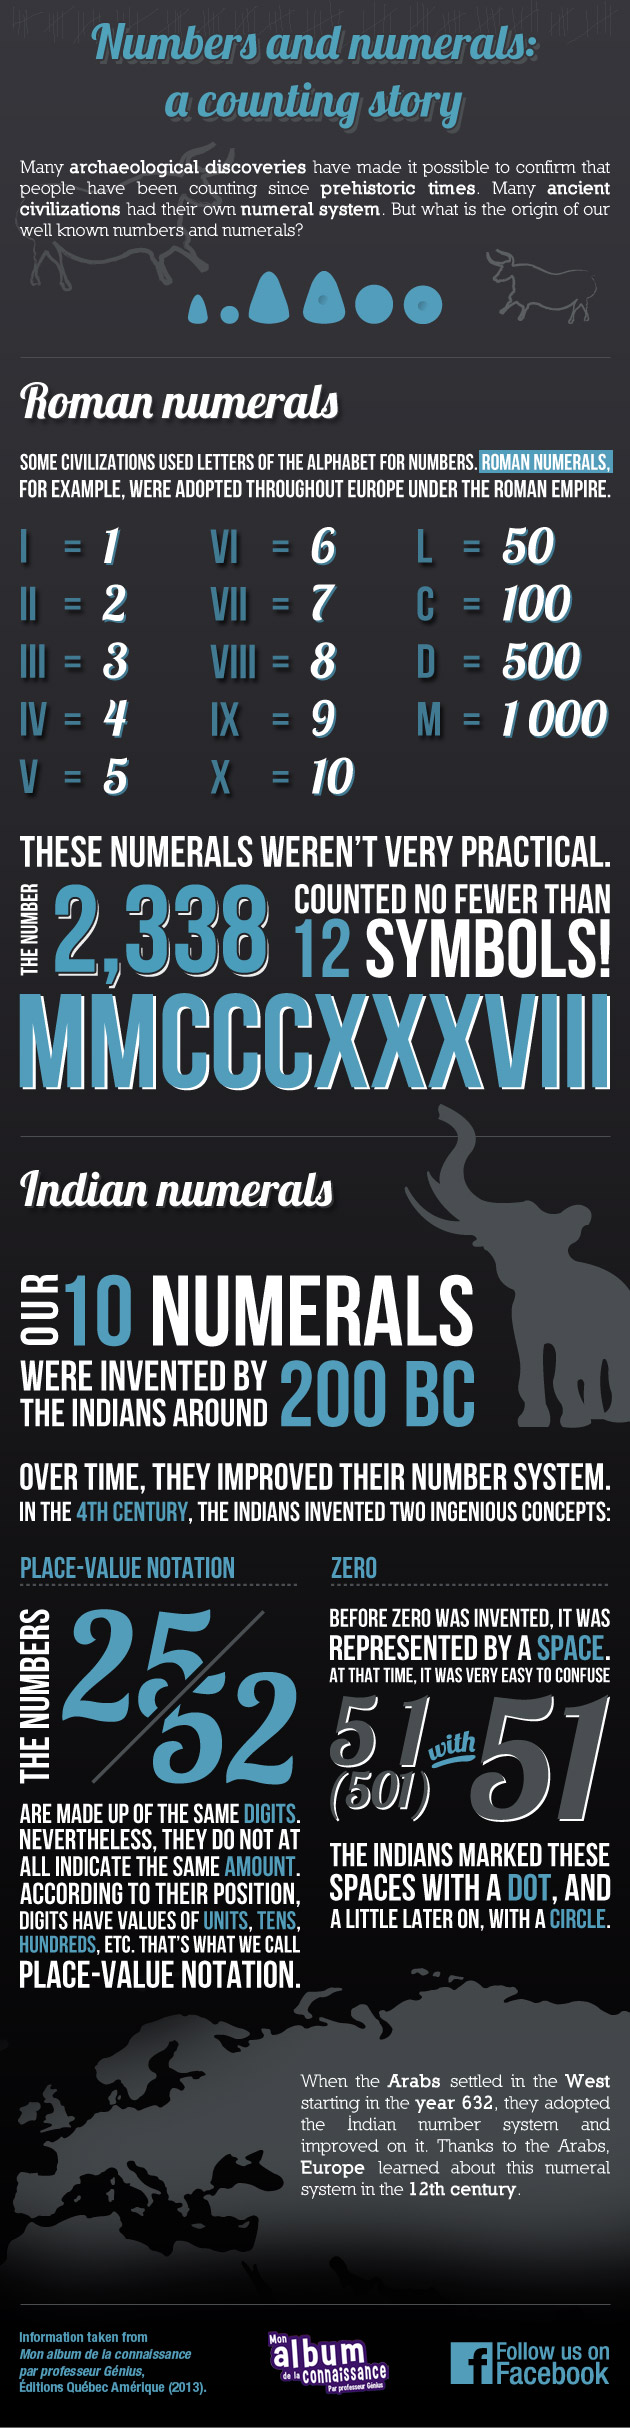 Numeral System History